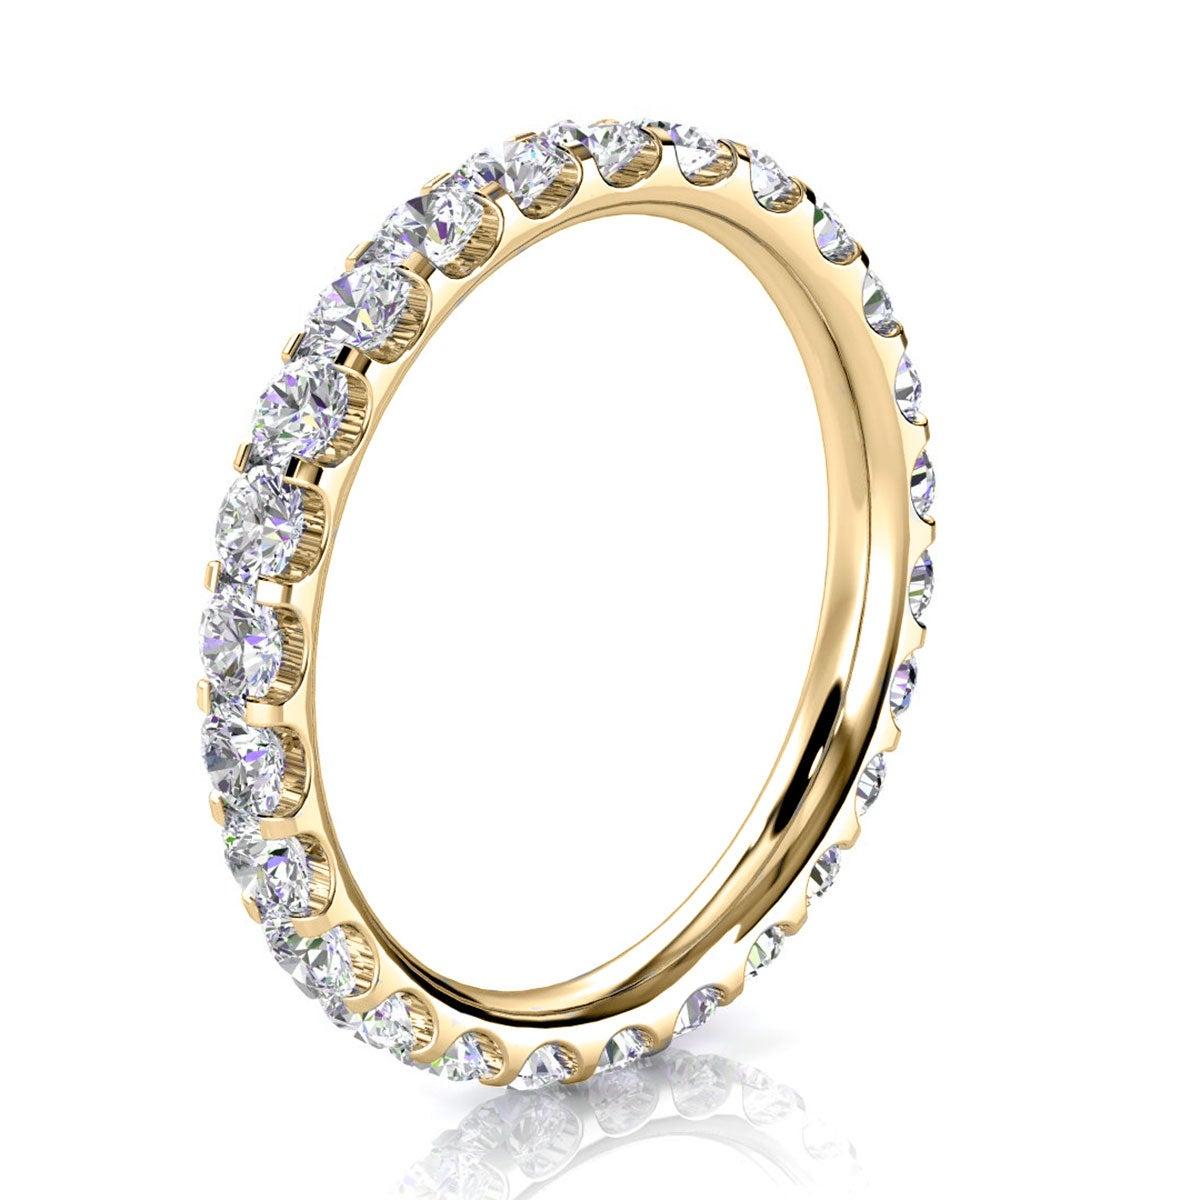 For Sale:  14k Yellow Gold Viola Eternity Micro-Prong Diamond Ring '1 Ct. Tw' 2